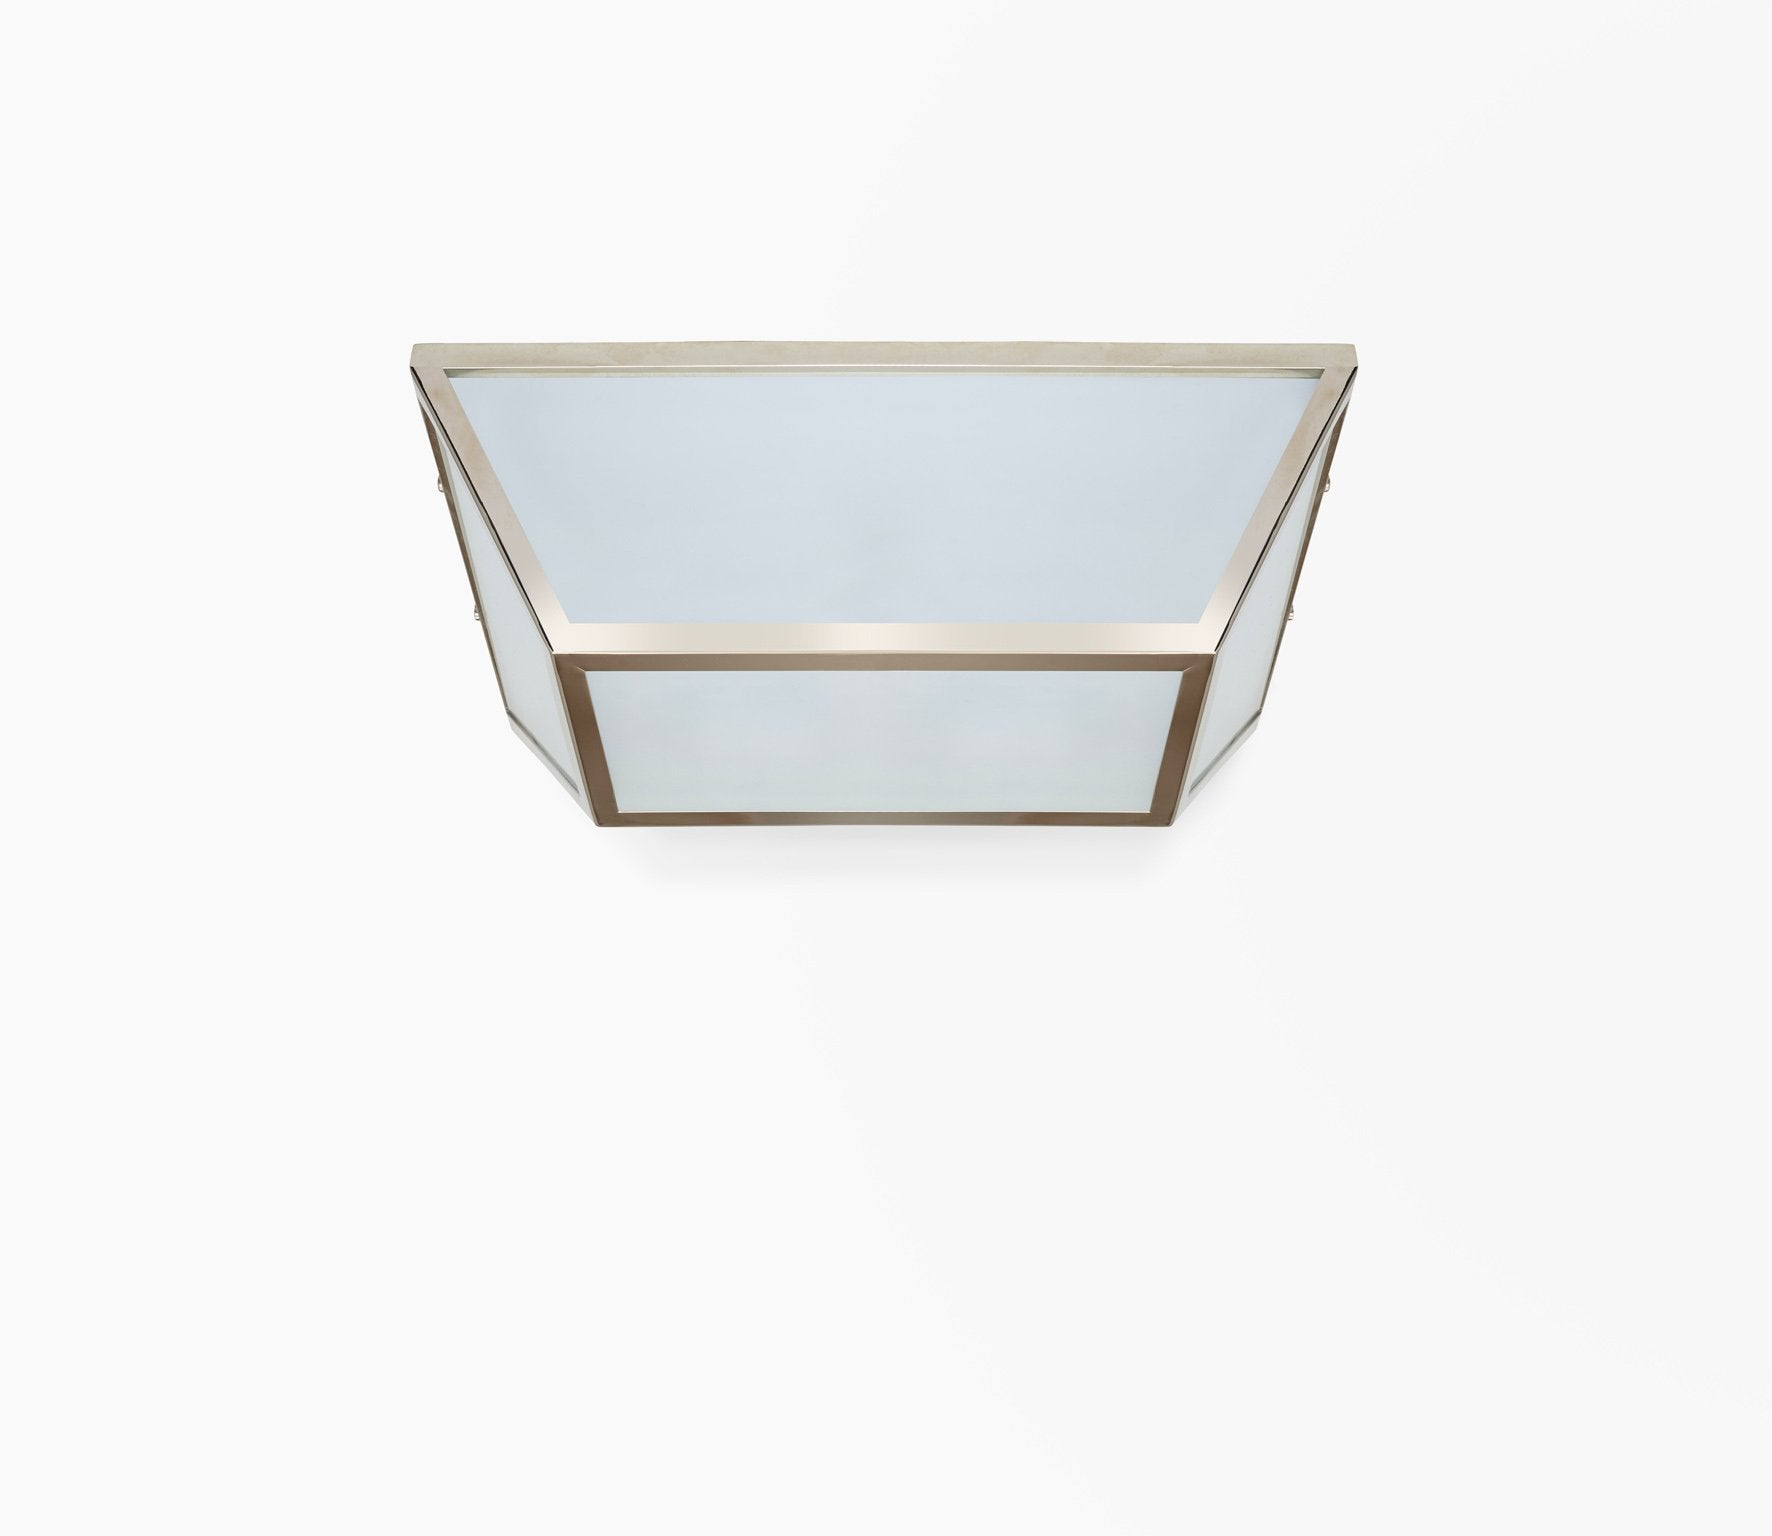 Strand Ceiling Light Product Image 2